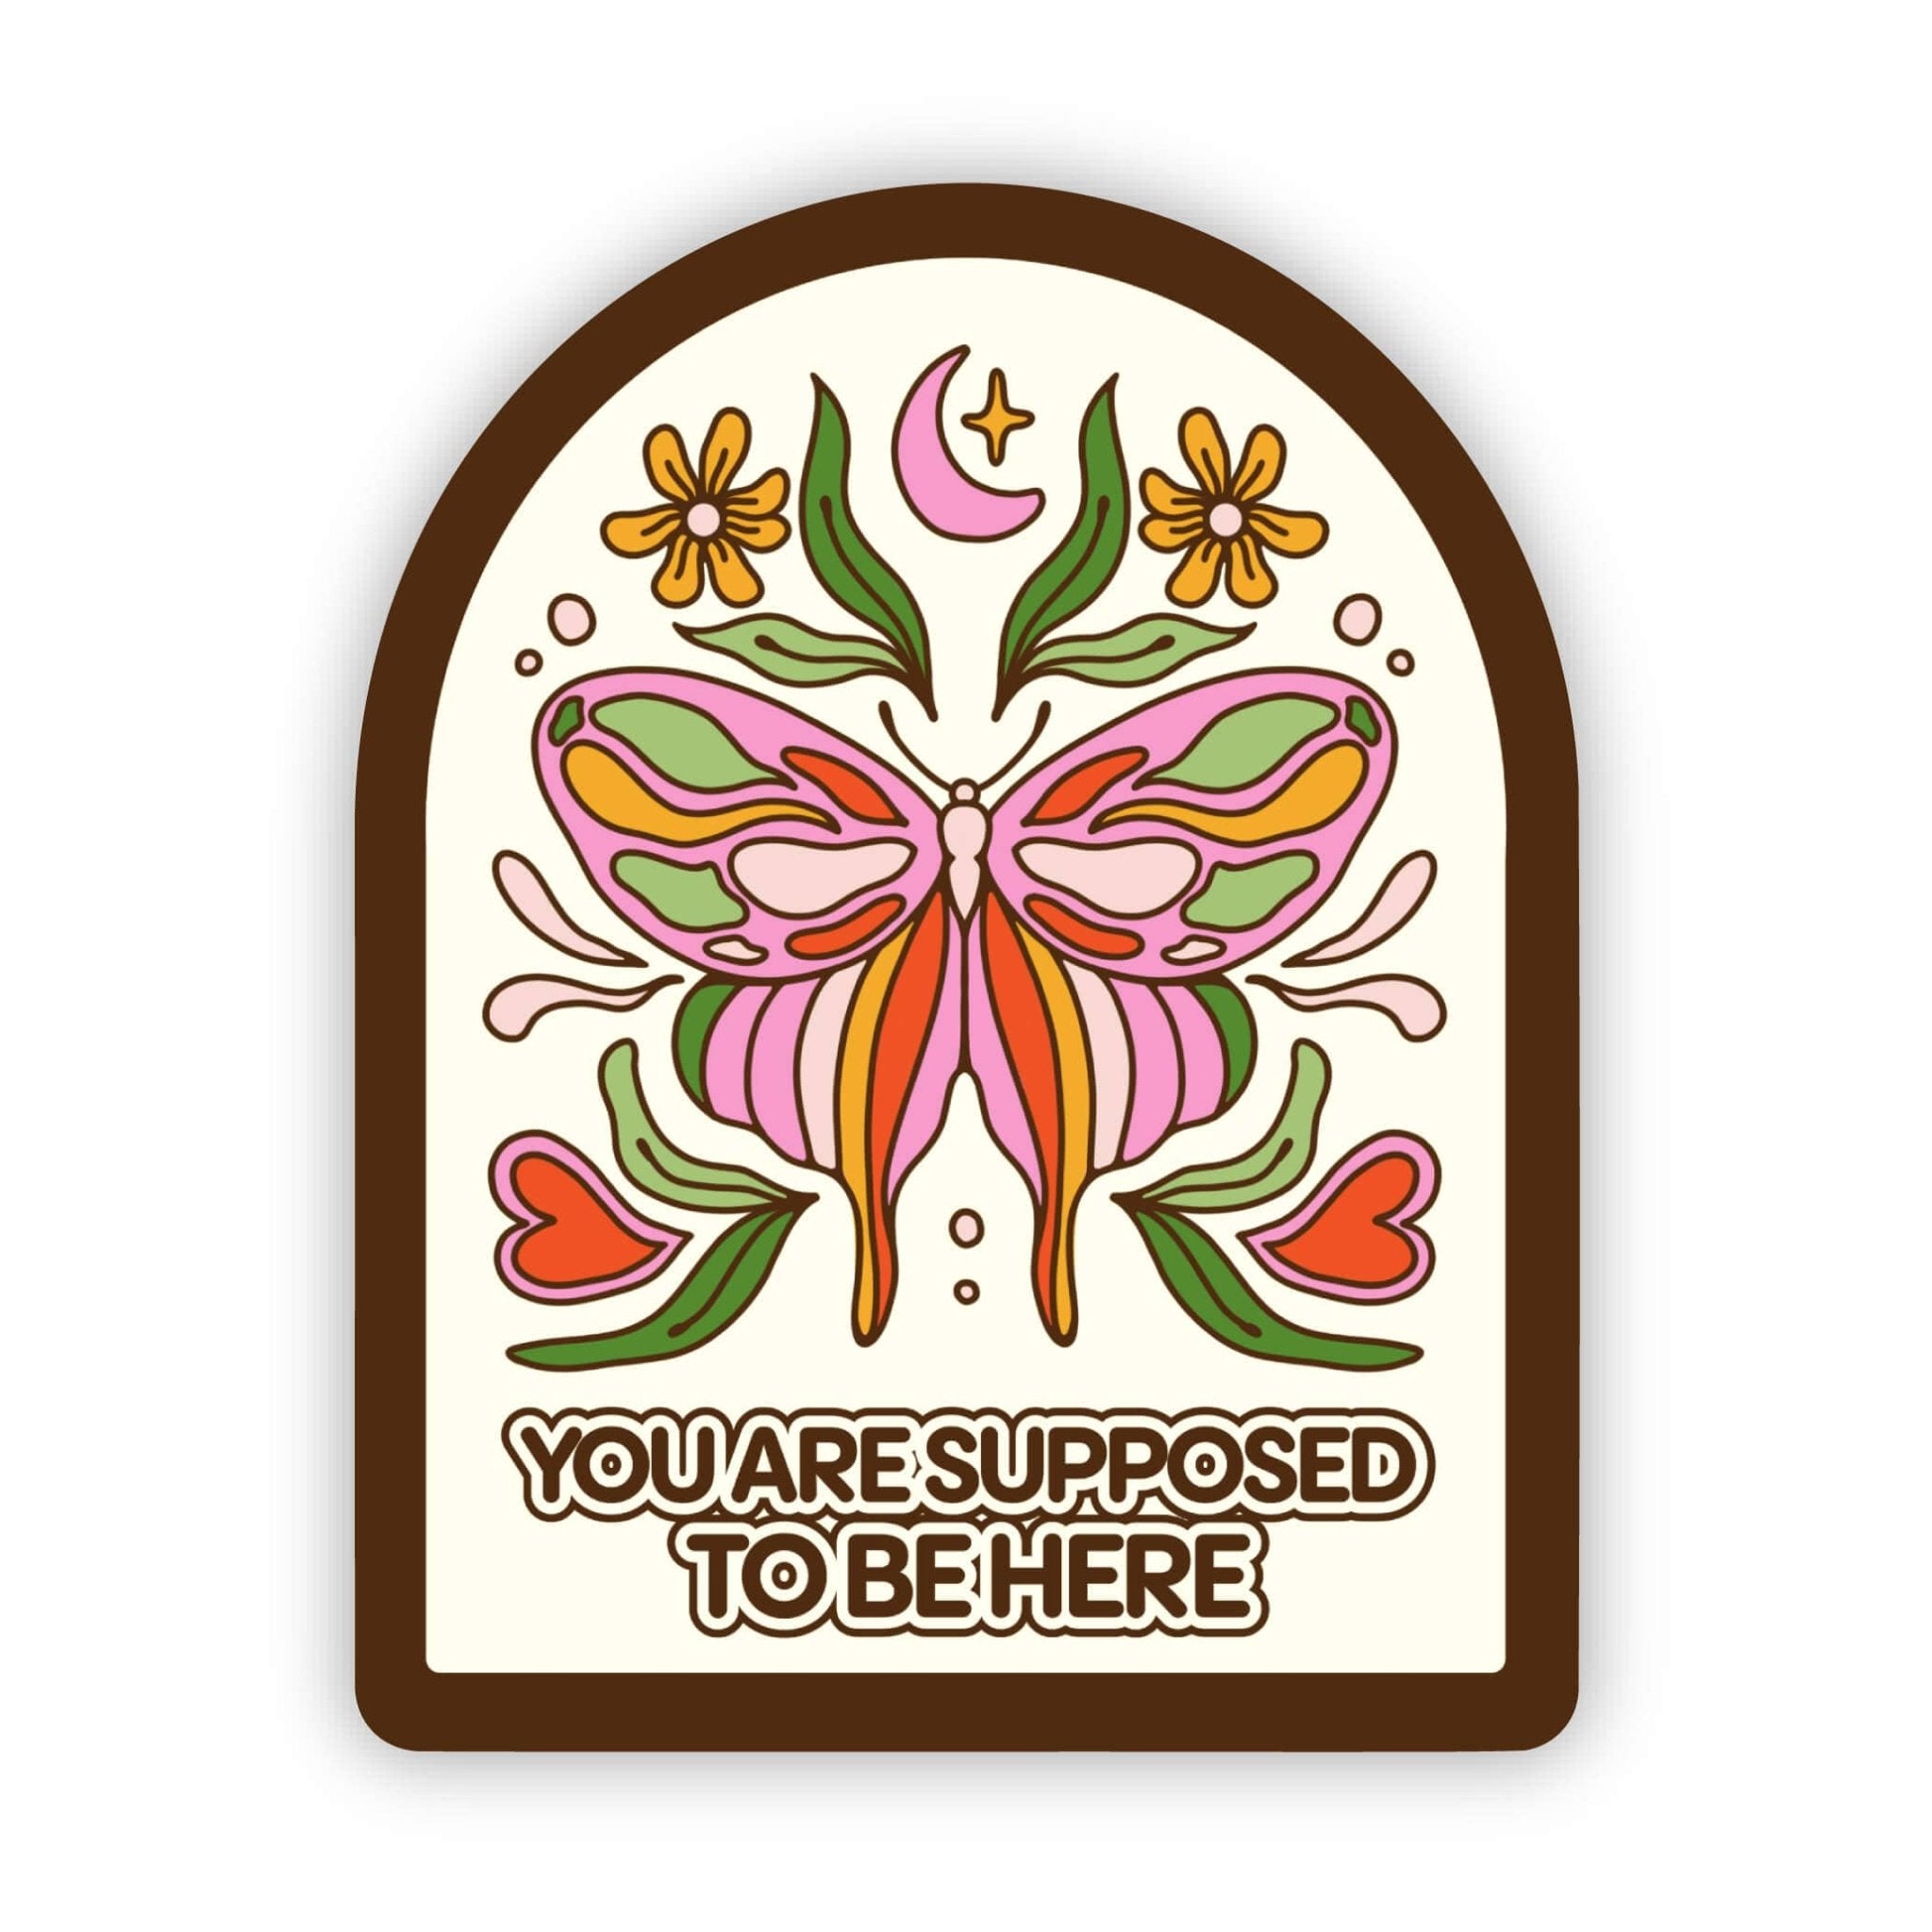 "You're Supposed To Be Here" Sticker - Sacred Crystals Stickers